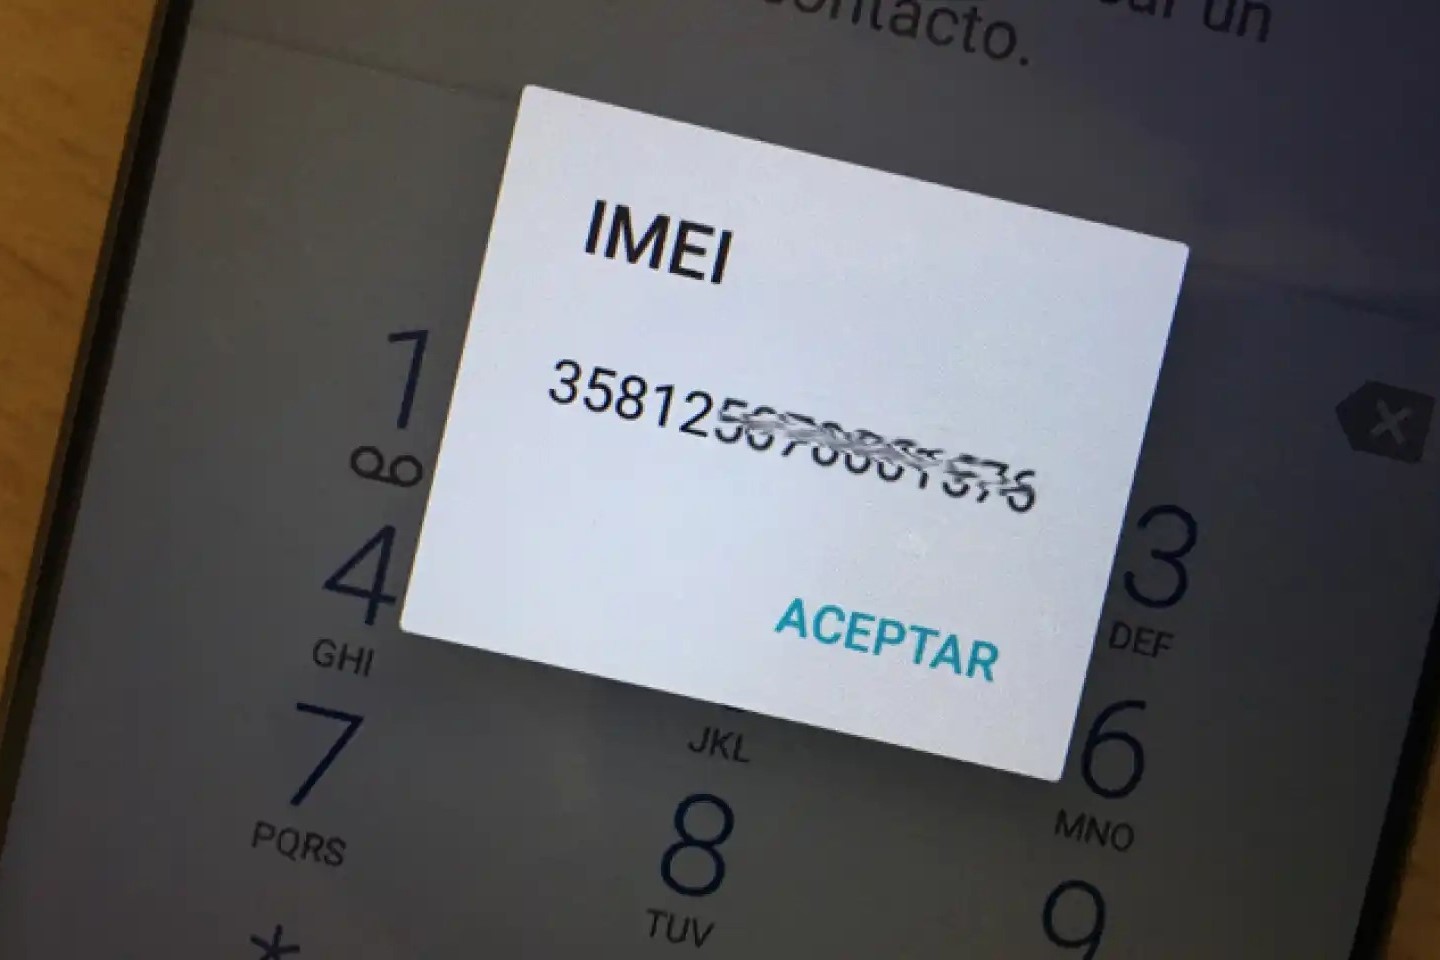 Identifying Activated SIM Cards Through IMEI Number: Explained